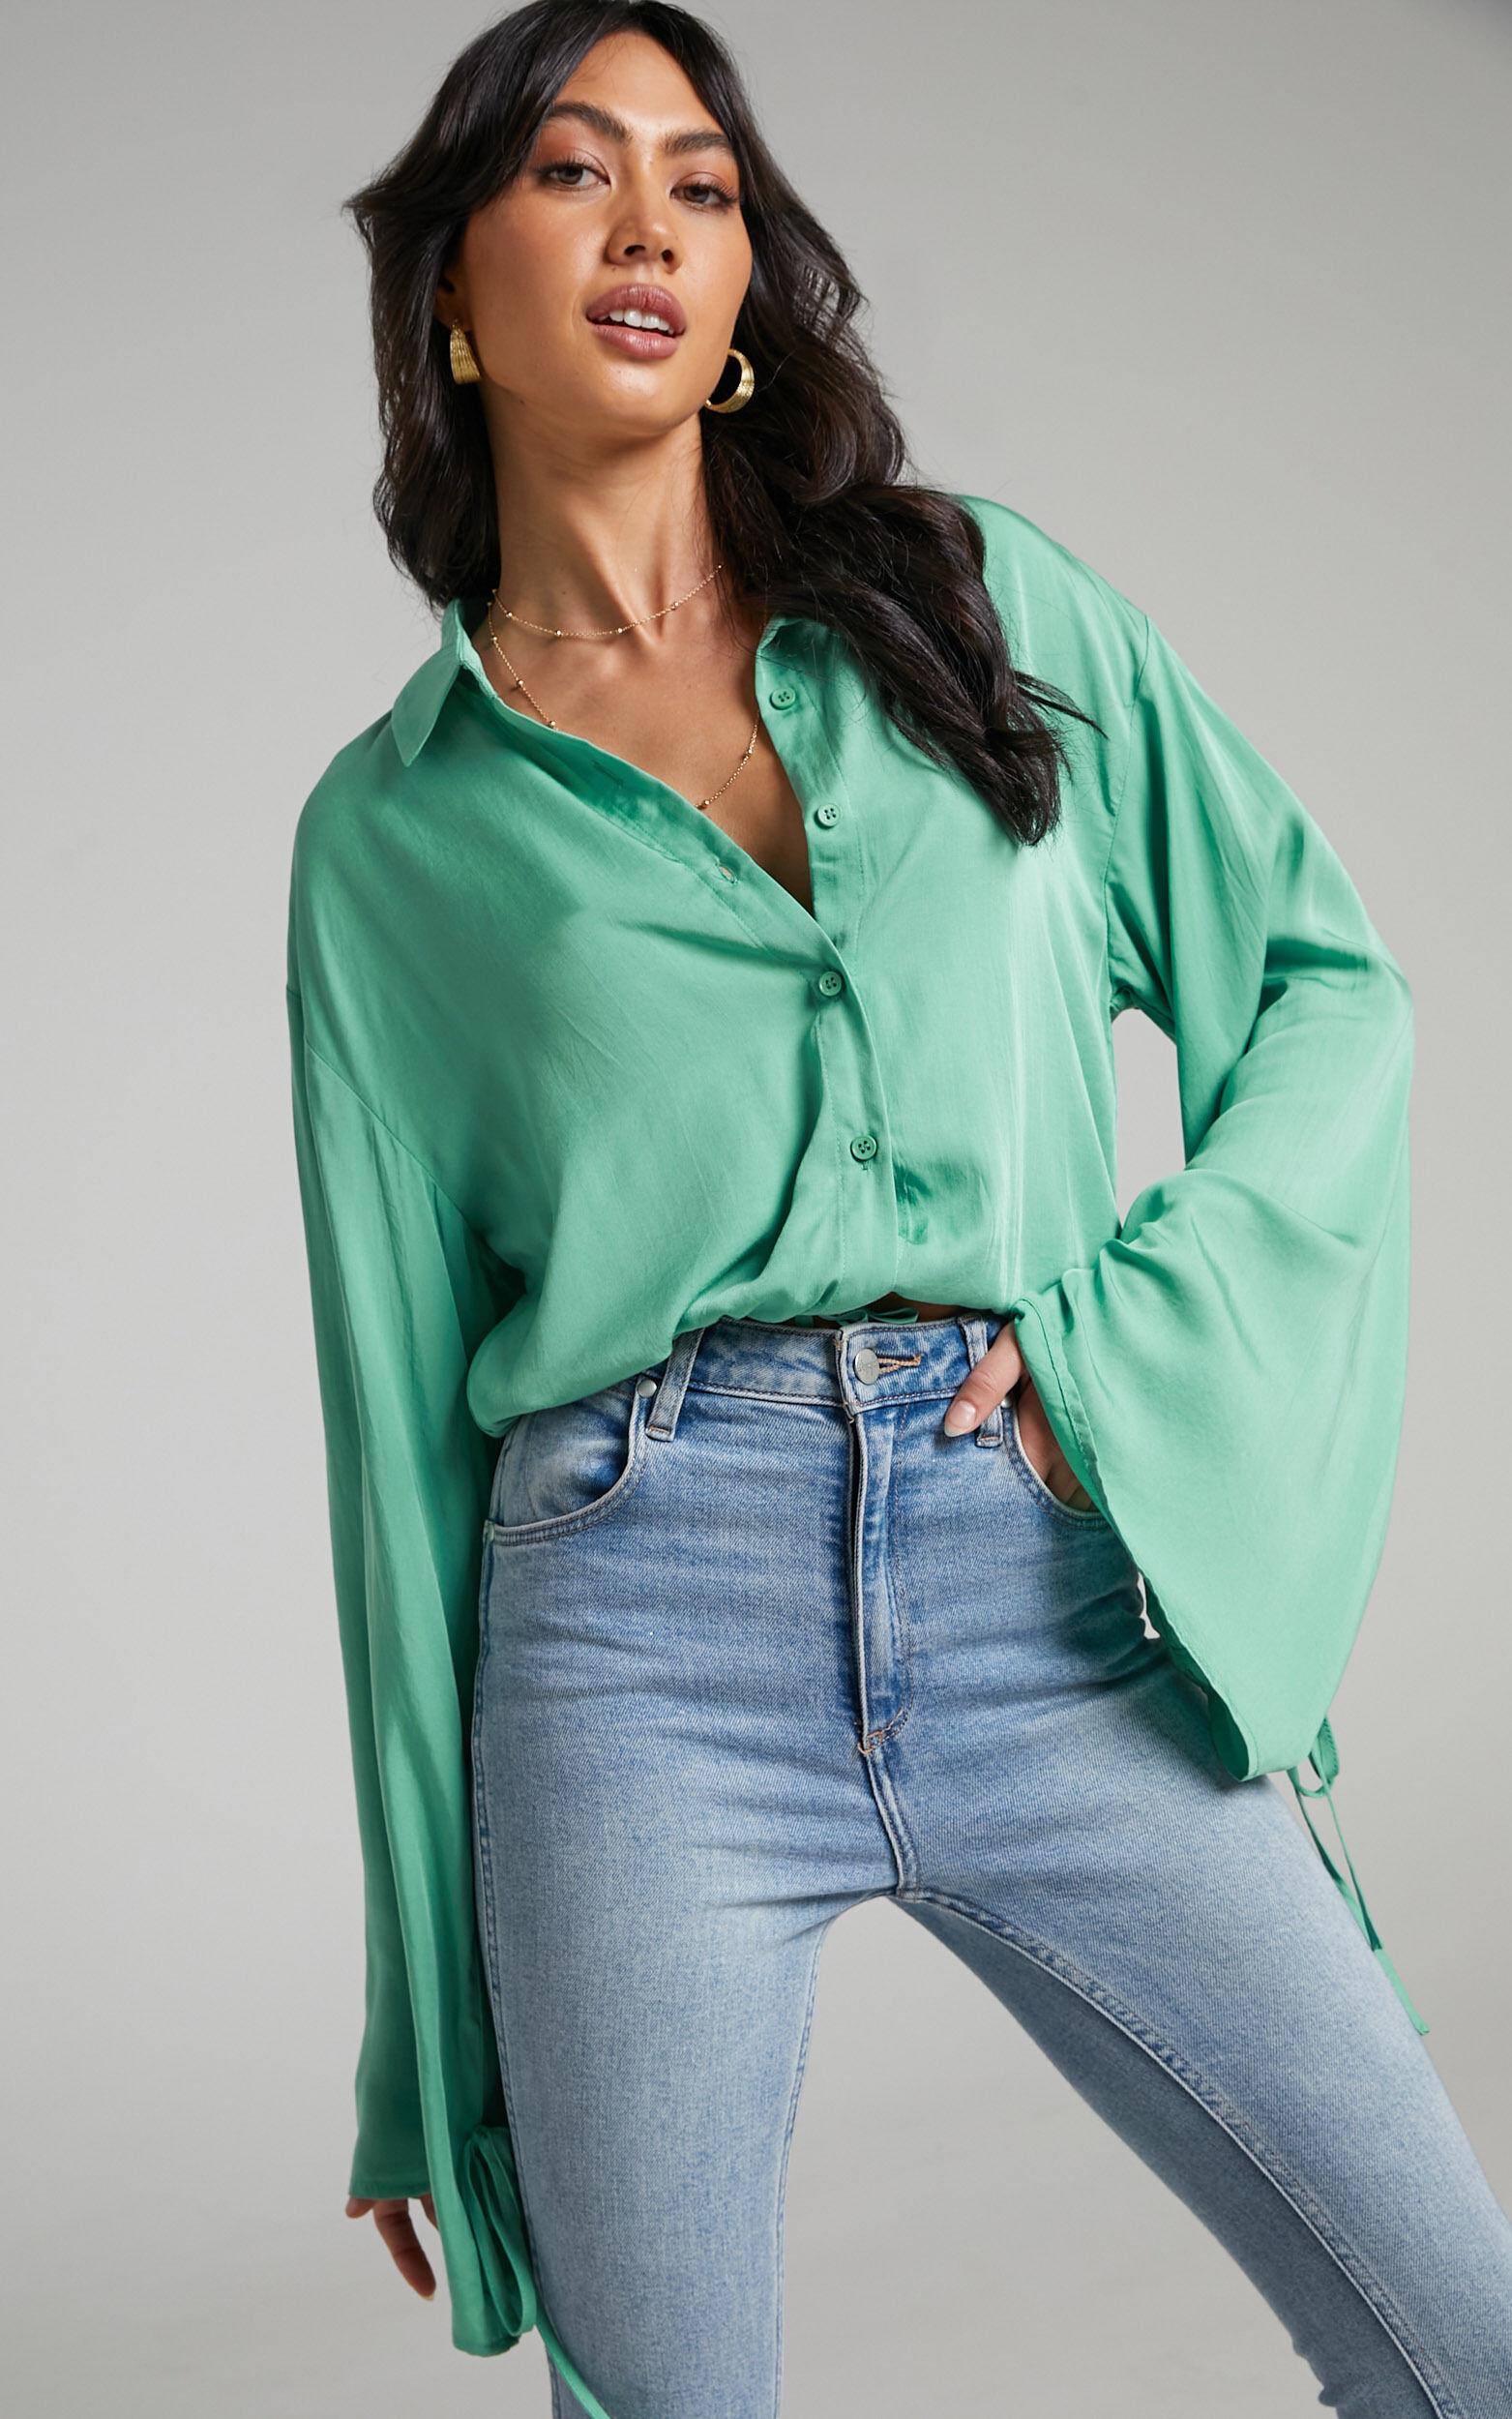 Wanda Button up Shirt in Seafoam - 06, GRN3, super-hi-res image number null